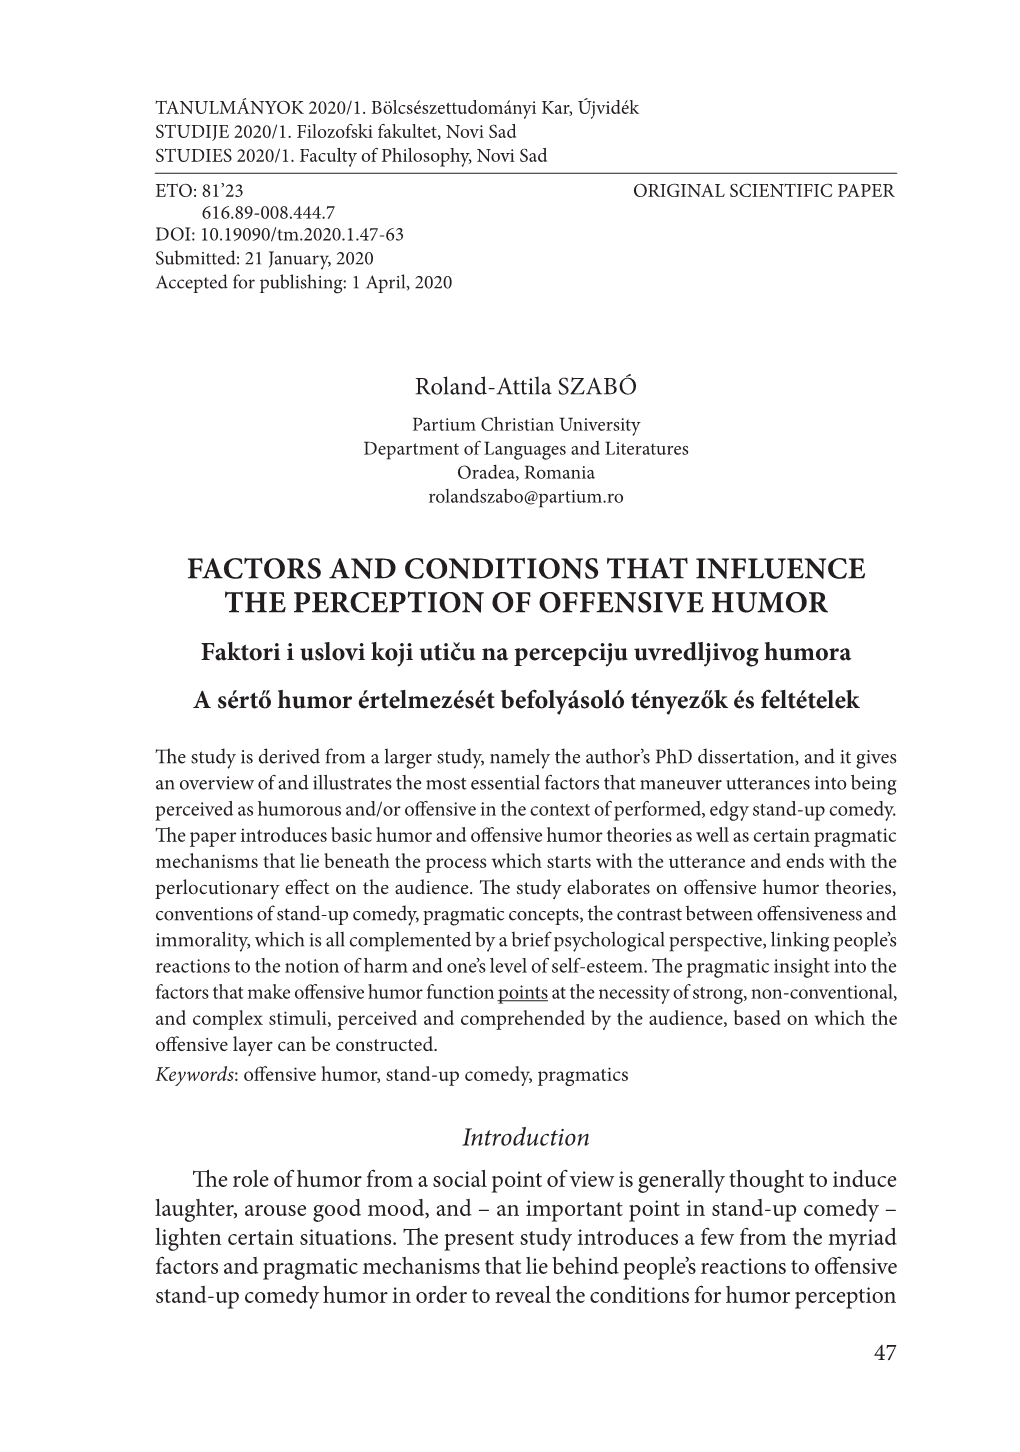 Factors and Conditions That Influence the Perception